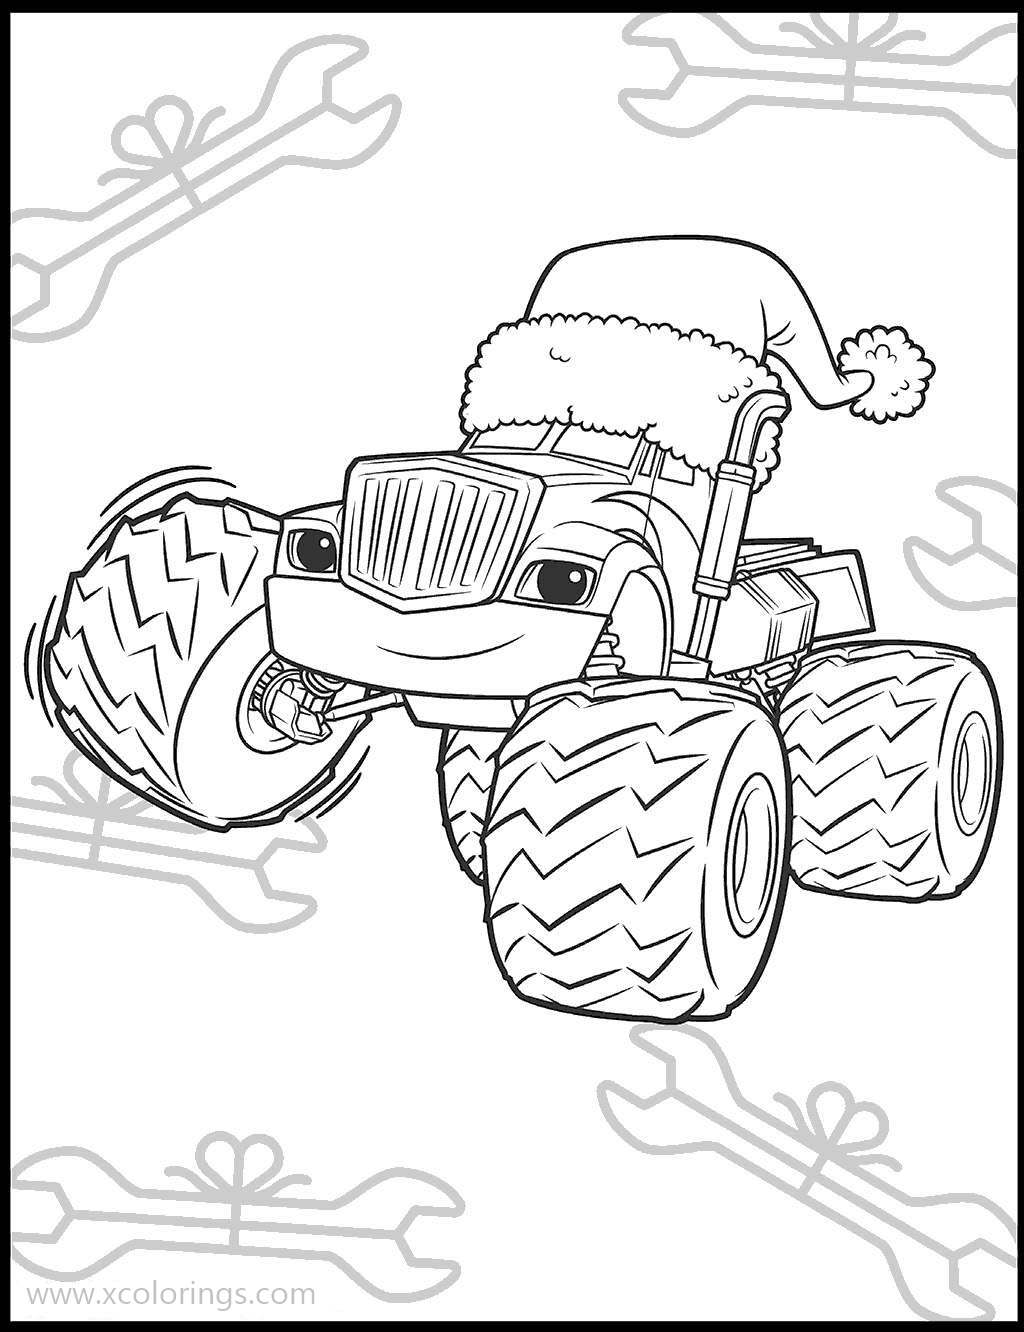 Free Blaze and the Monster Machines Coloring Pages Christmas Activity Sheets printable